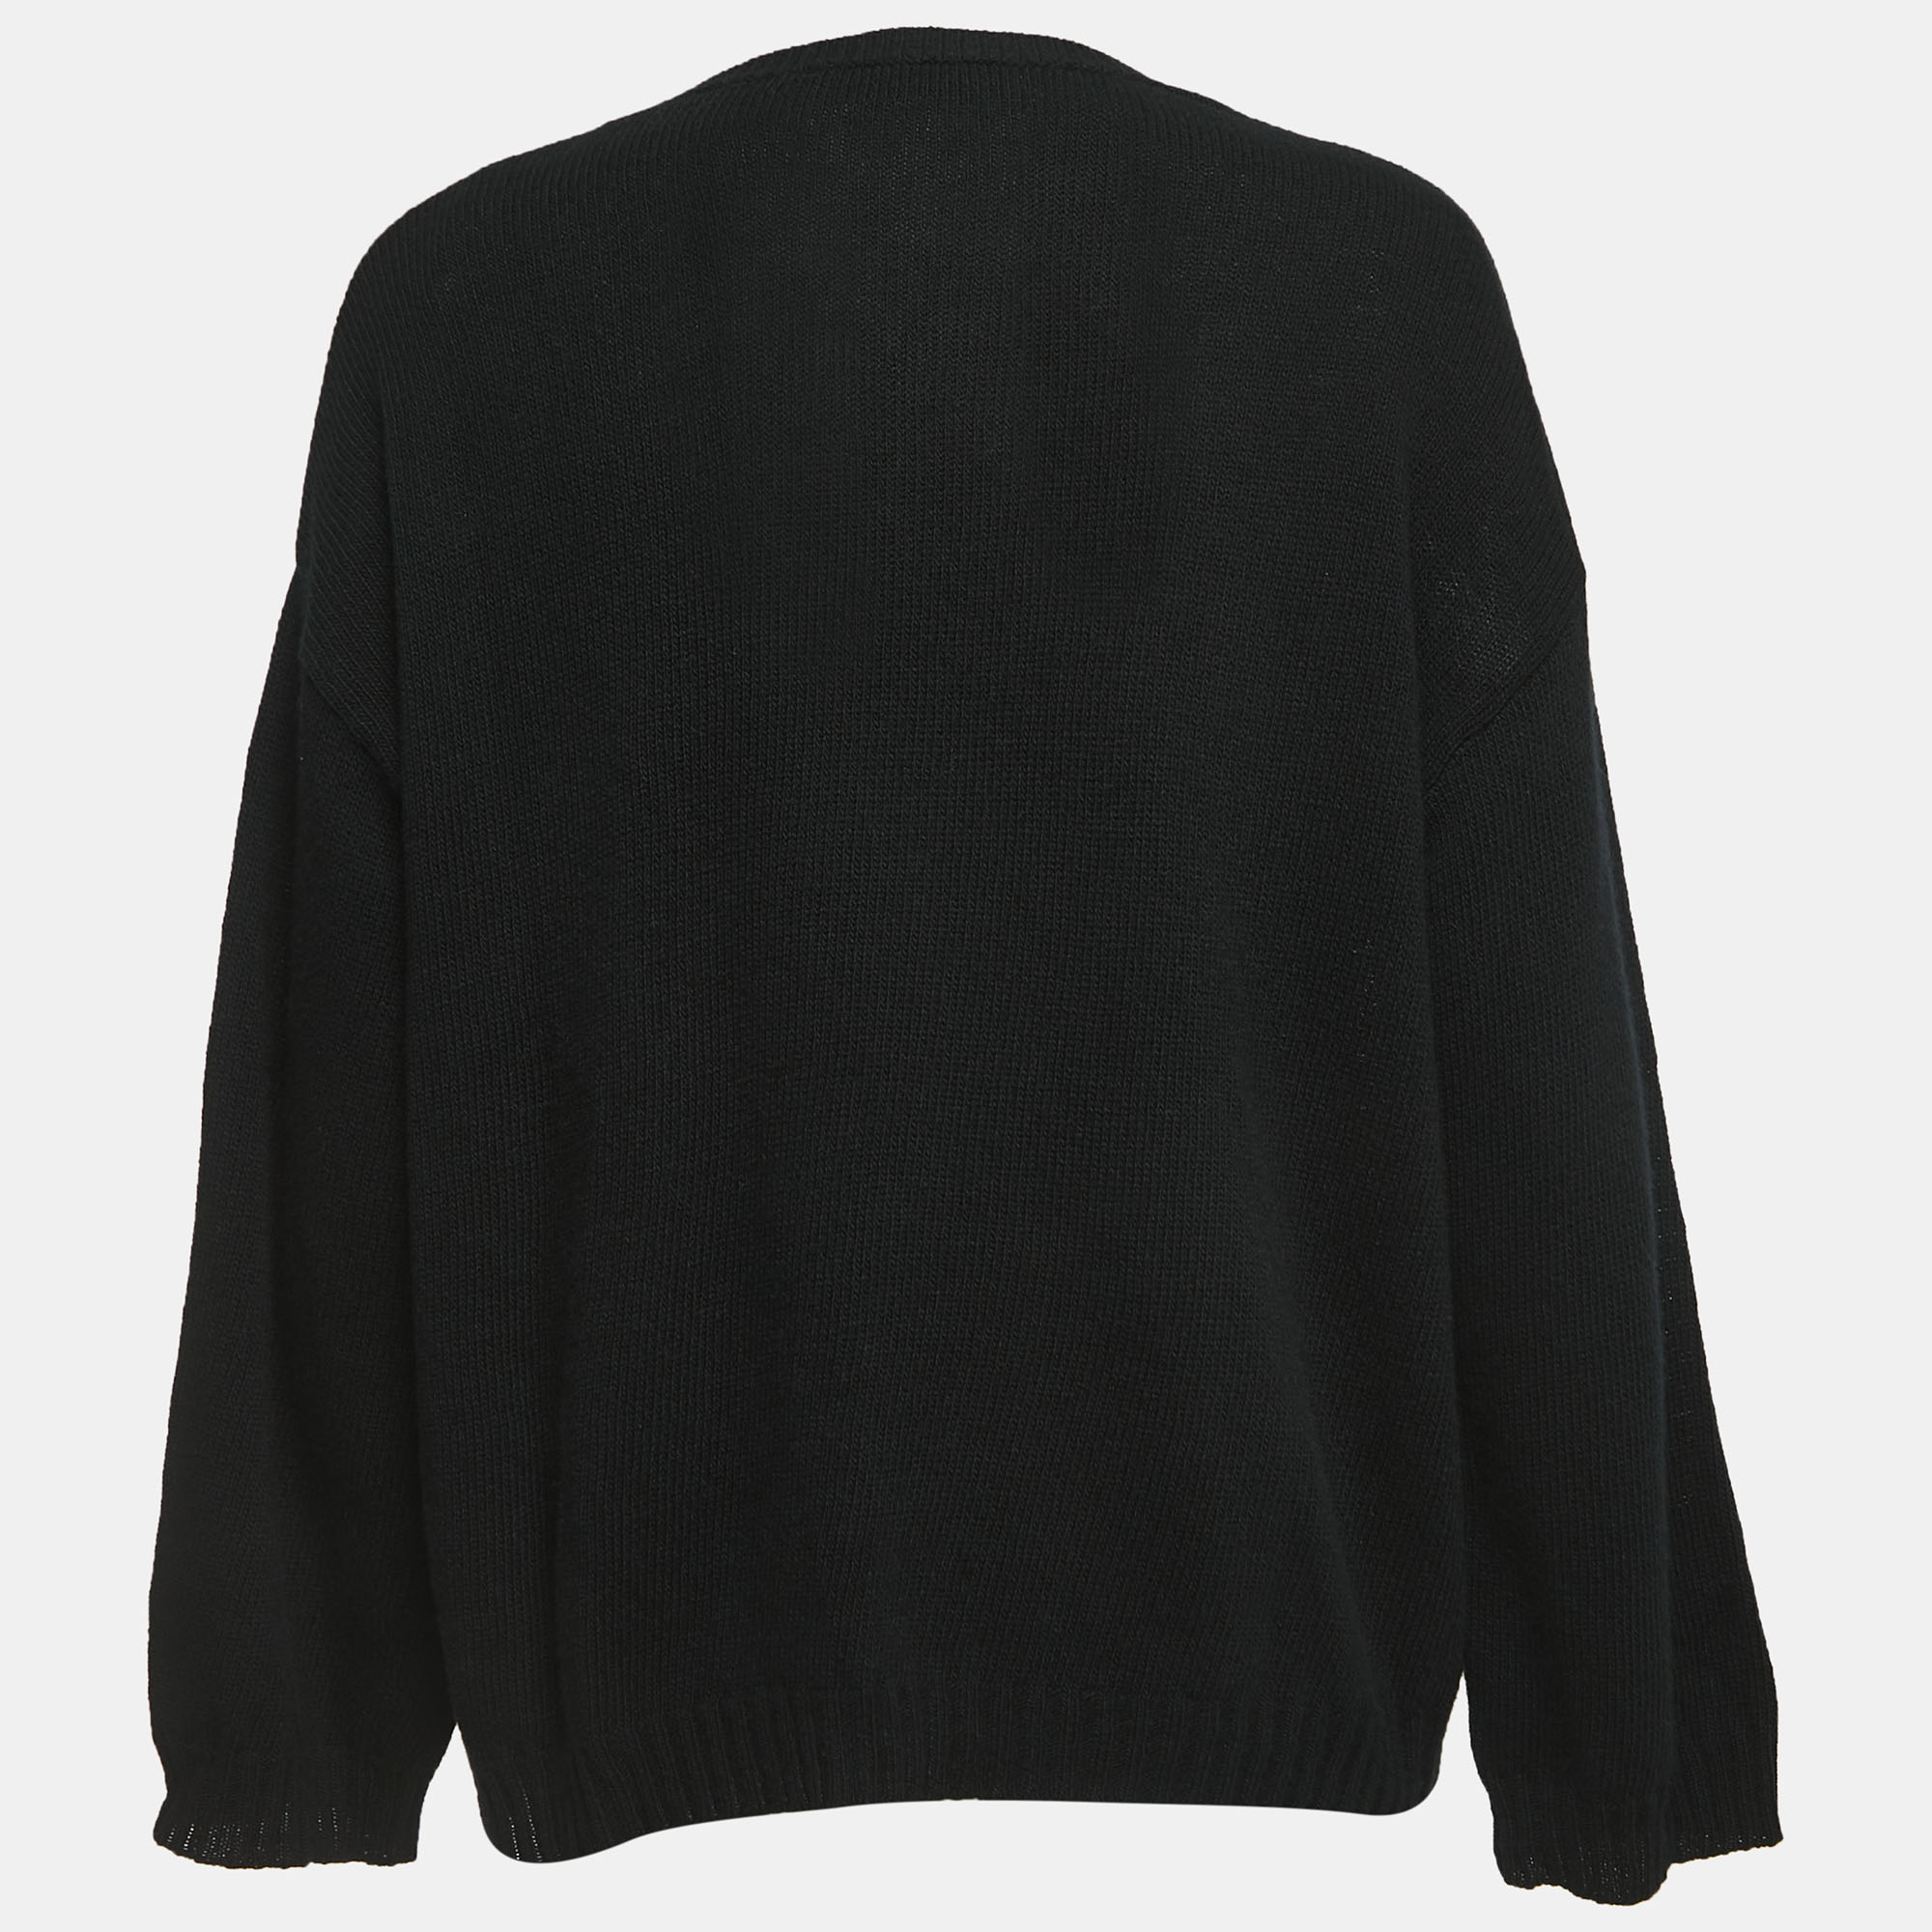 

Valentino Black Wool & Cashmere Floral Detail Sweater